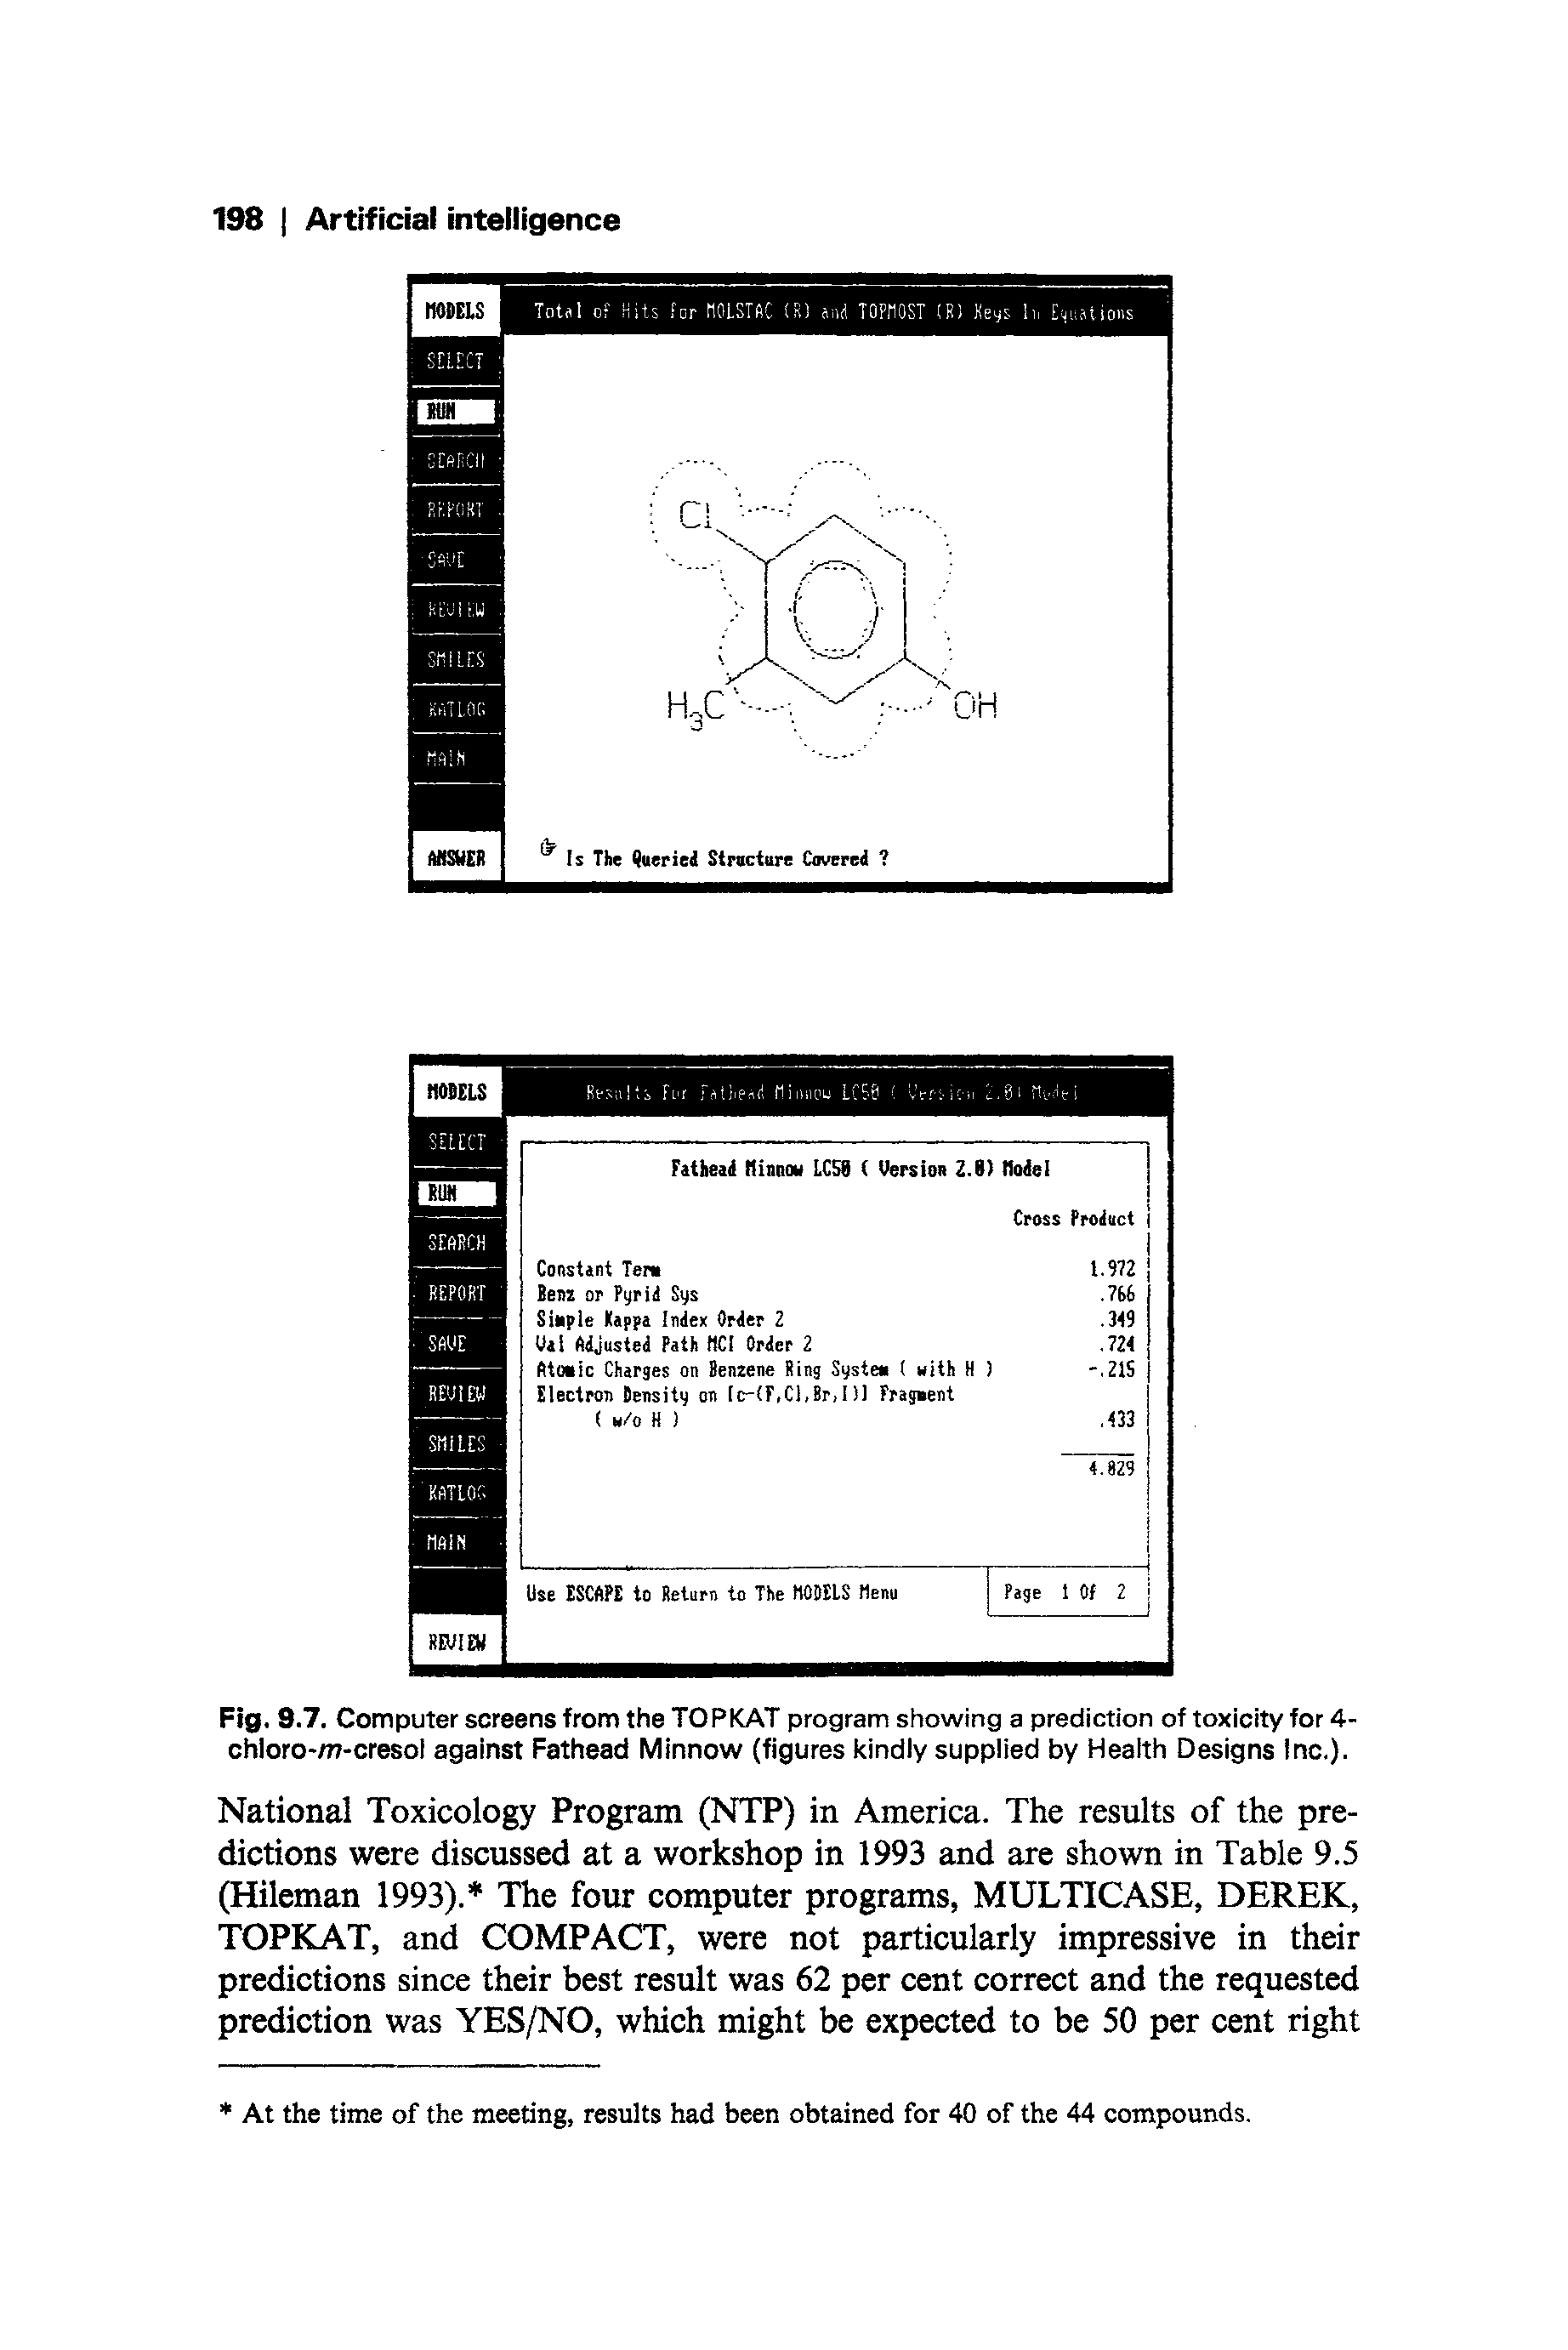 Fig. 9.7. Computer screens from the TOPKAT program showing a prediction of toxicity for 4-chloro-/77-cresol against Fathead Minnow (figures kindiy suppiied by Health Designs Inc.).